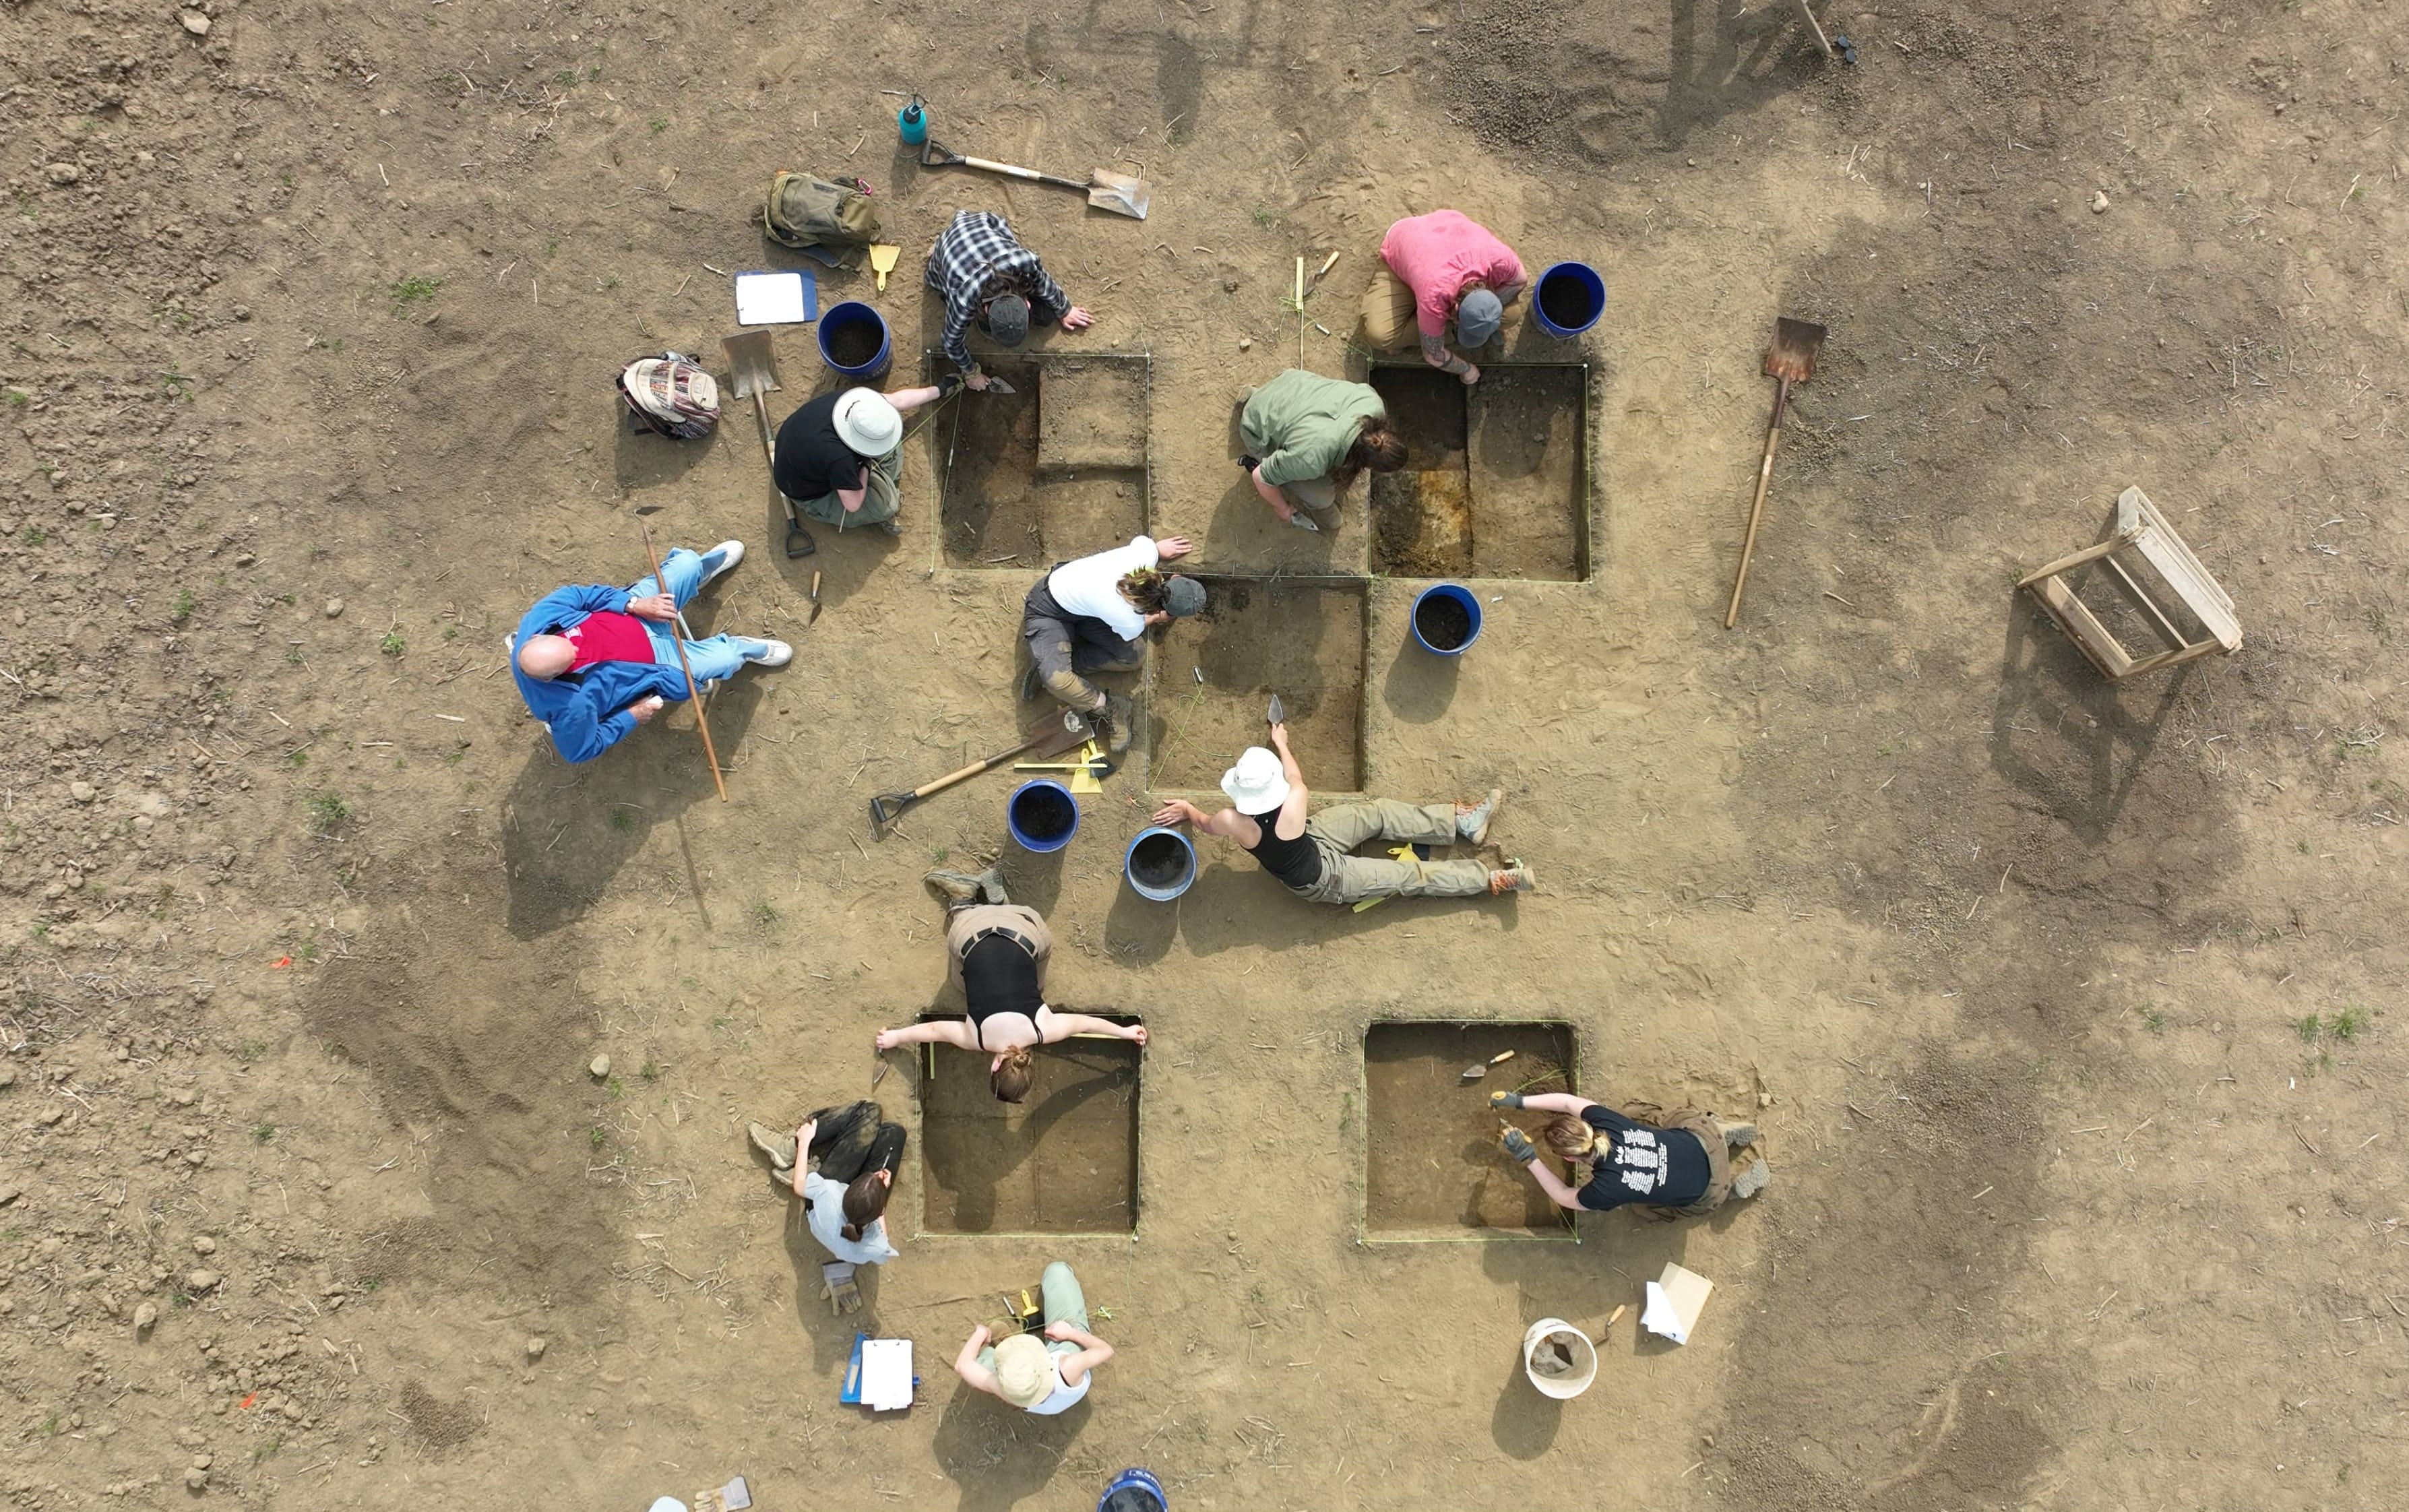 Using math and GIS: The OHIO students used the Pythagorean theorem to create perfect one-meter-by-one-meter square units. They also set up a datum, which is a permanent reference point so researchers can find that exact locations of the test units. Photo by Ben Siegel